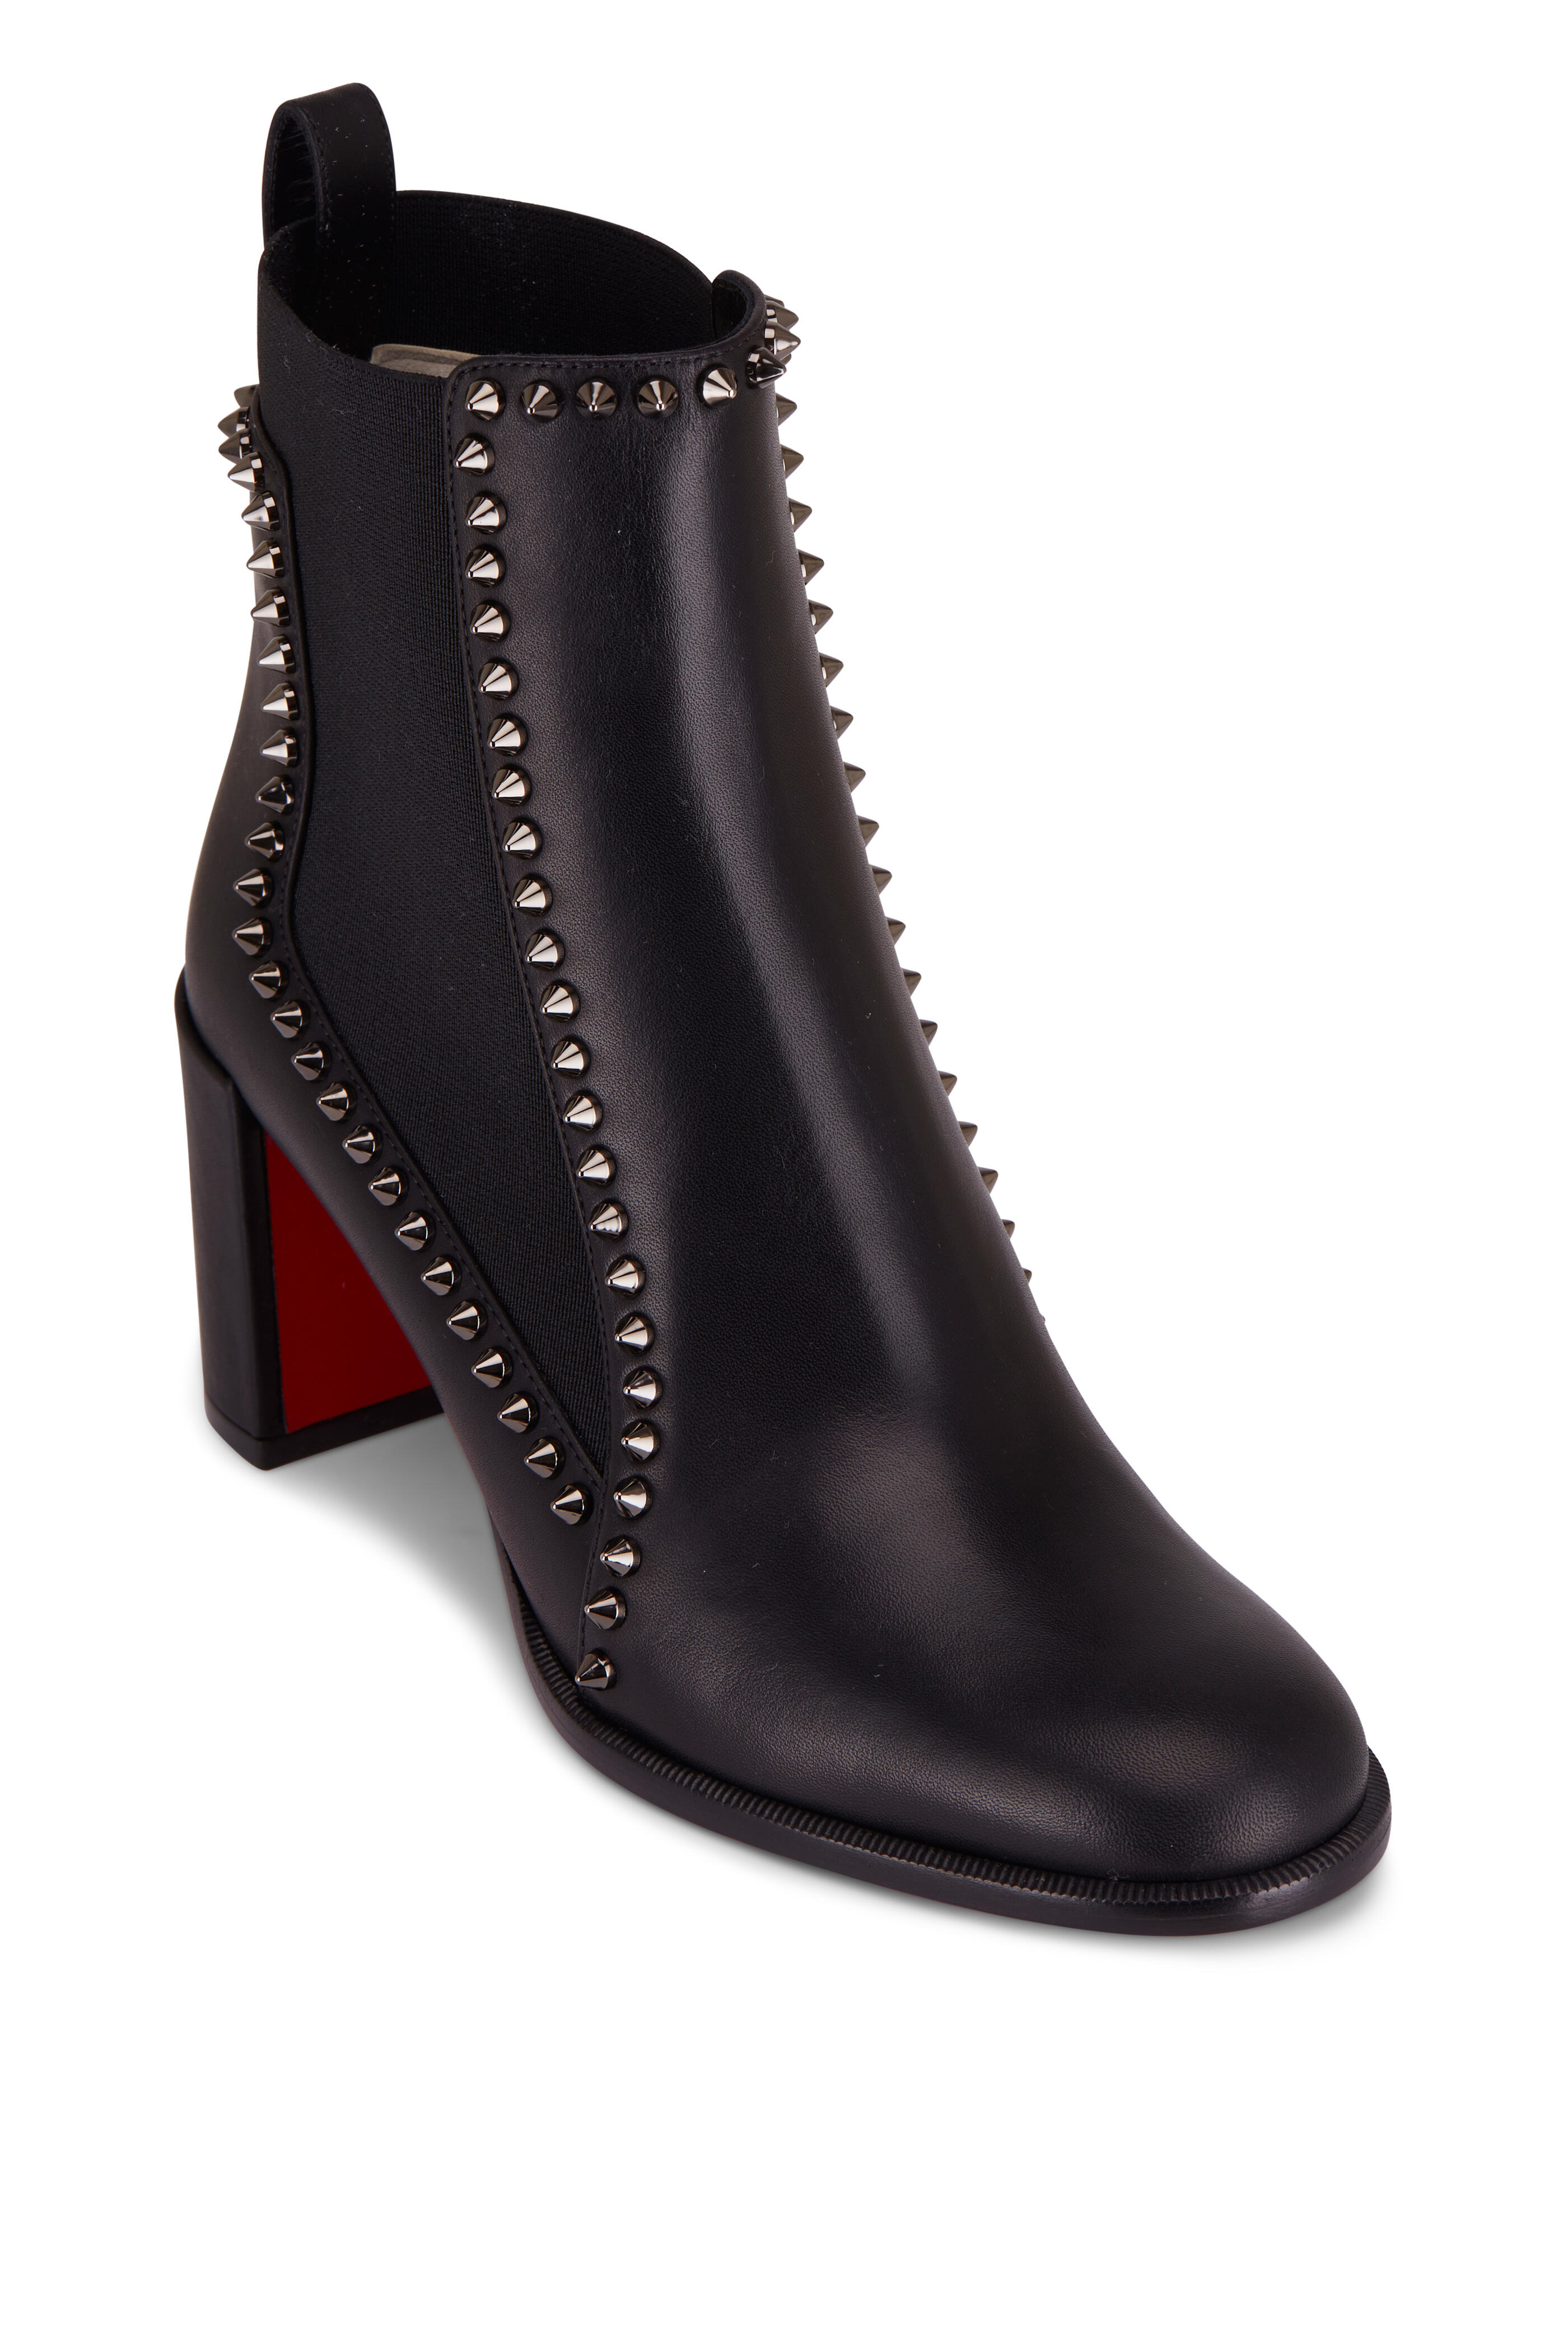 Christian Louboutin Brown Leather Cut Out Ankle Length Boots Size